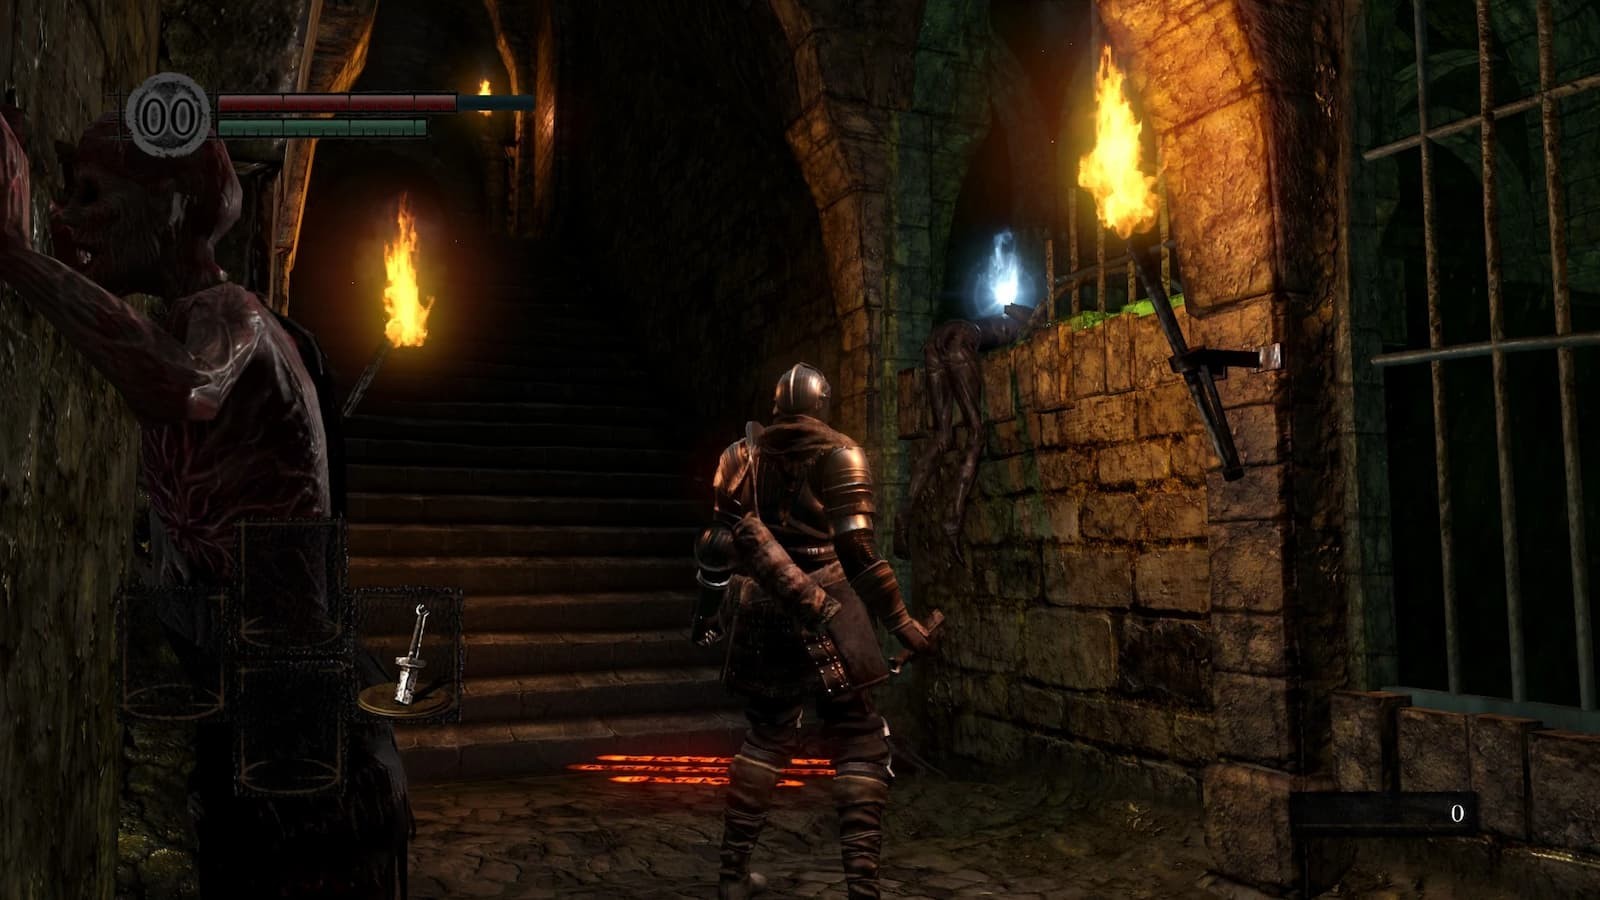 While players wait for Elden Ring DLC, there is a new Dark Souls mod to experience.